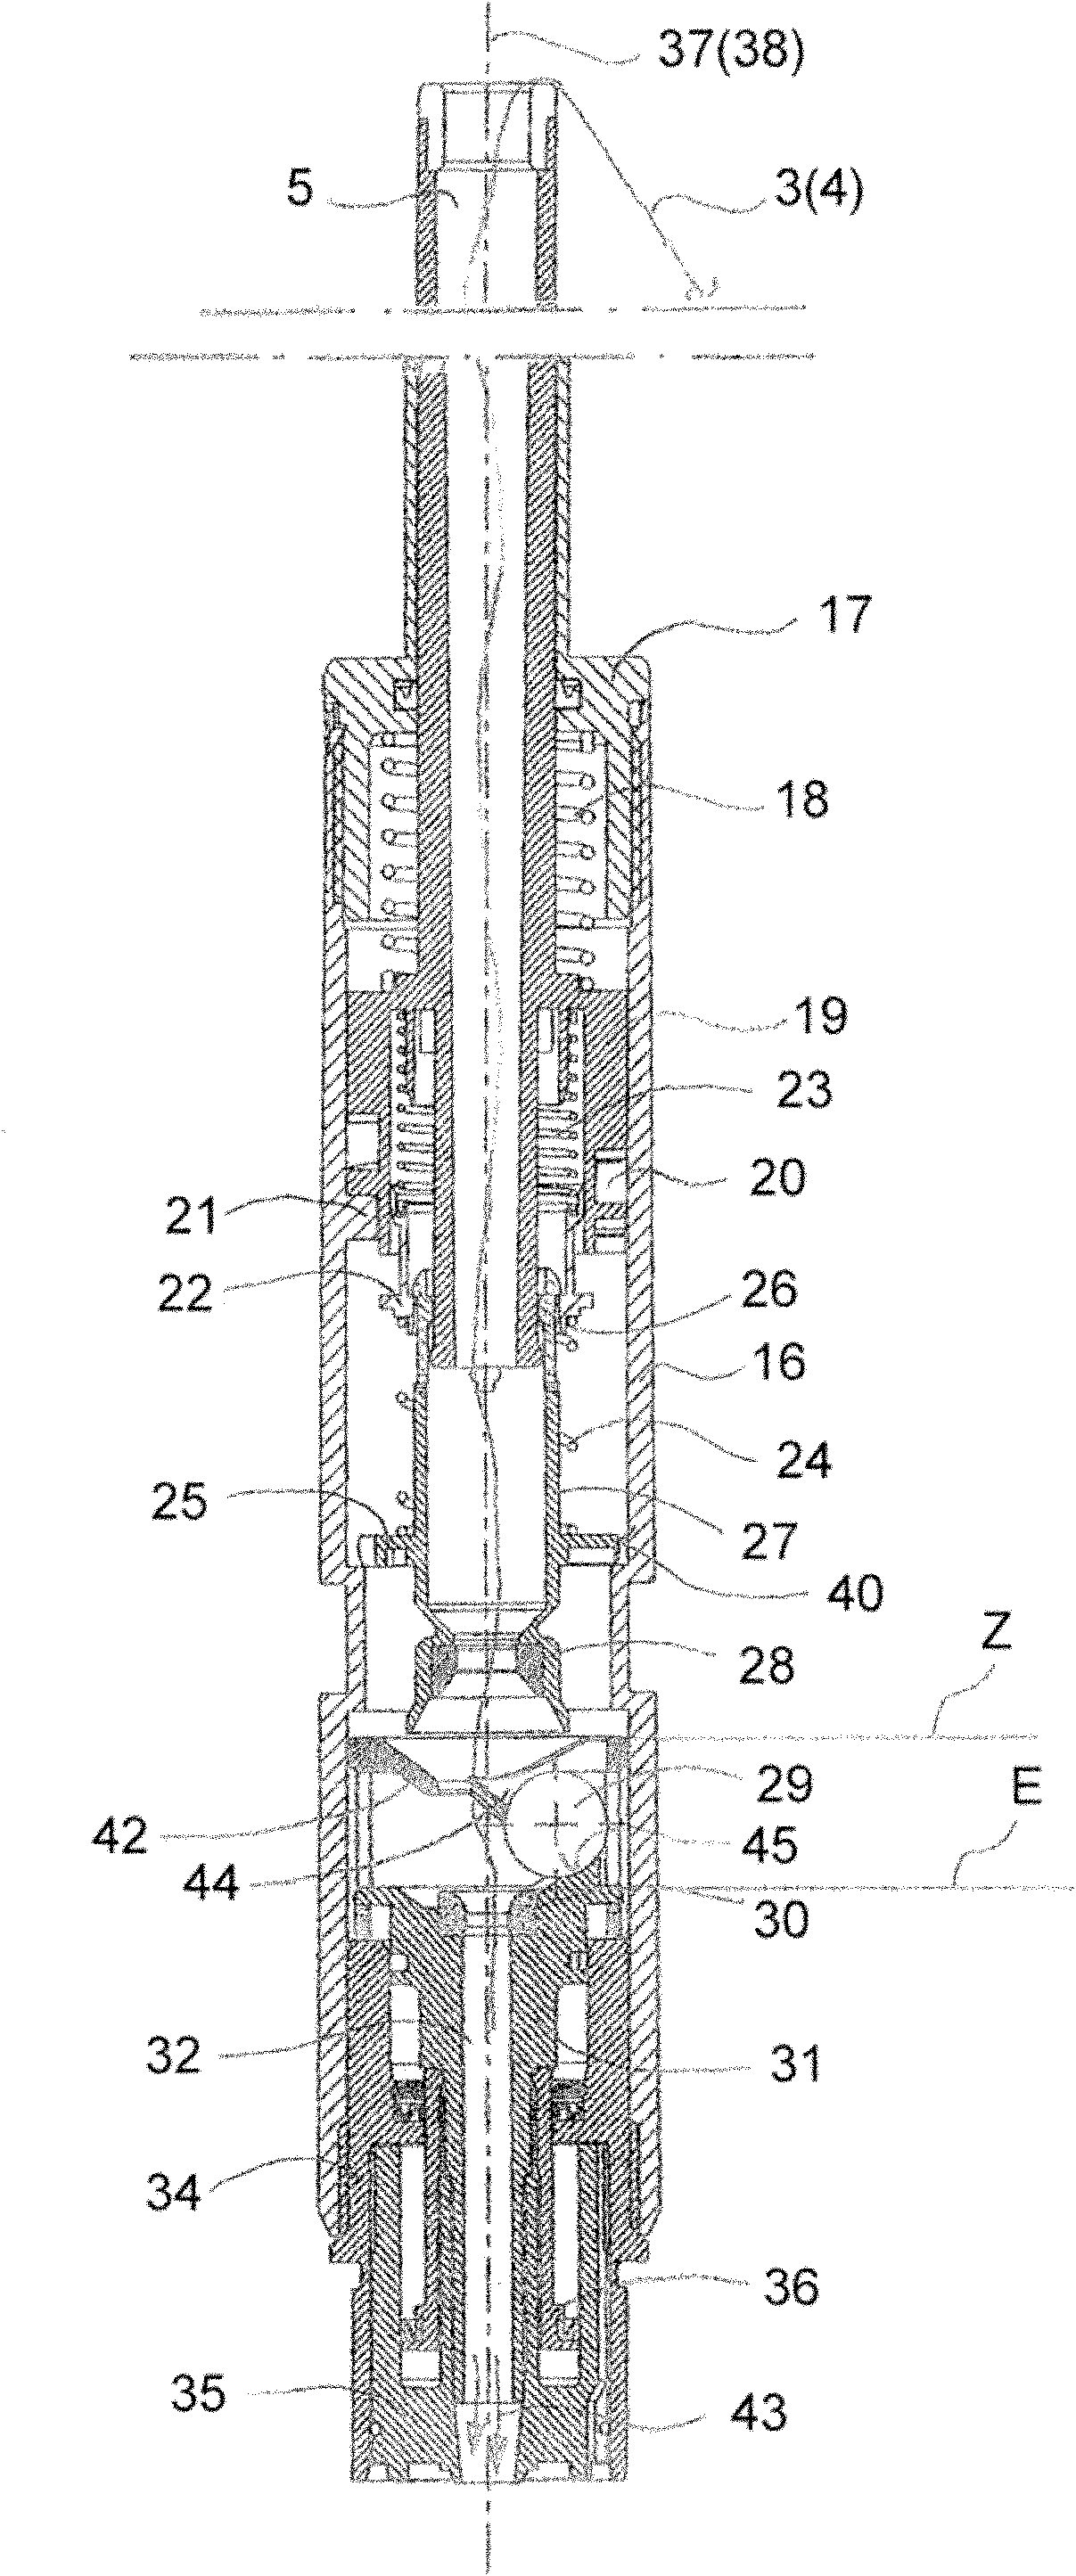 Yarn tension device for a double-strand twisting spindle